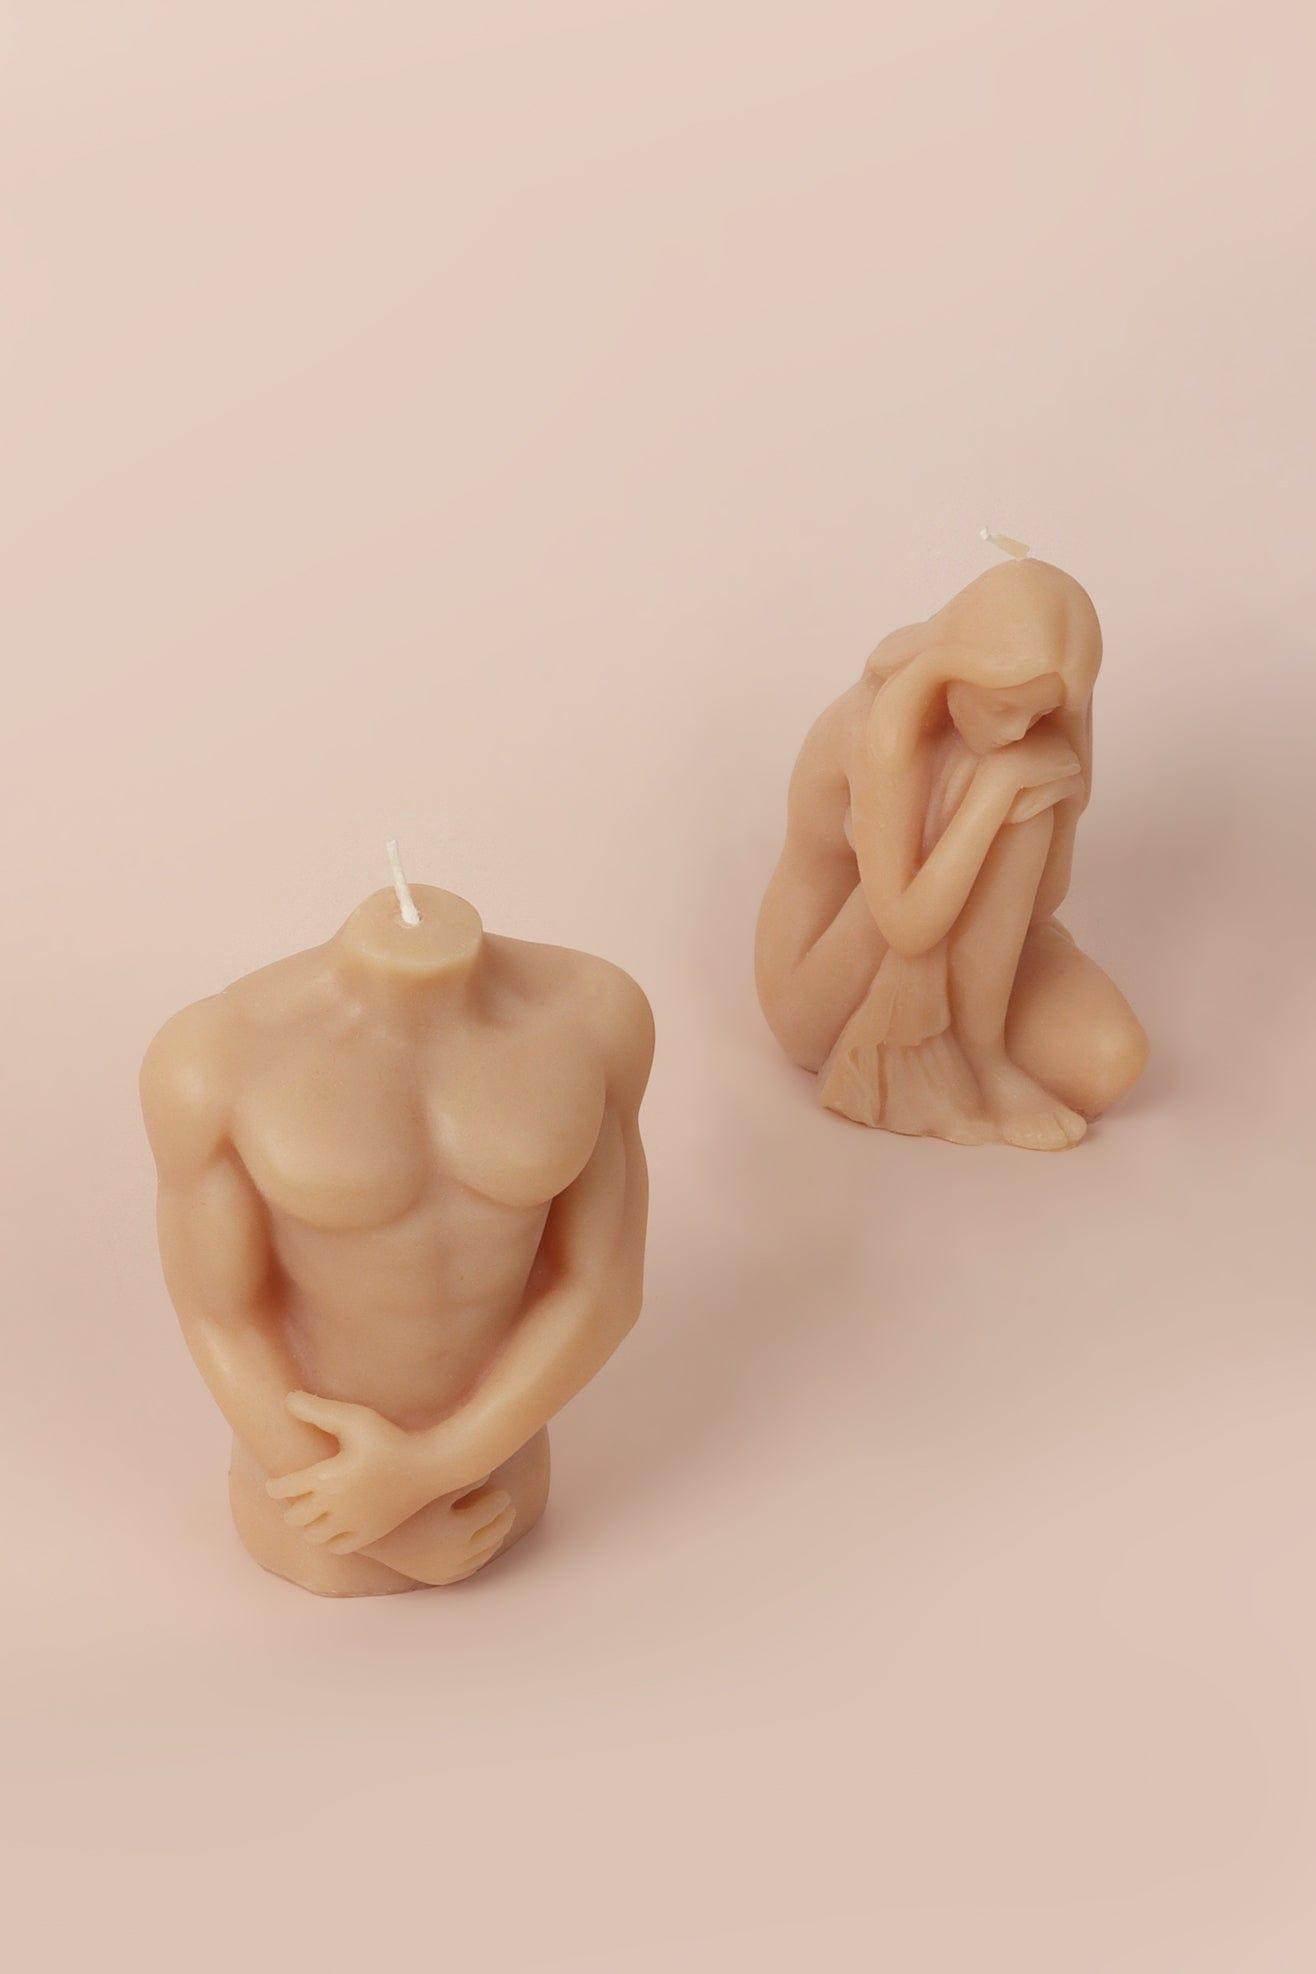 G Decor Candles & Candle Holders Beige / Set of Both Muscular Male Torso and Crouching Female Candles.